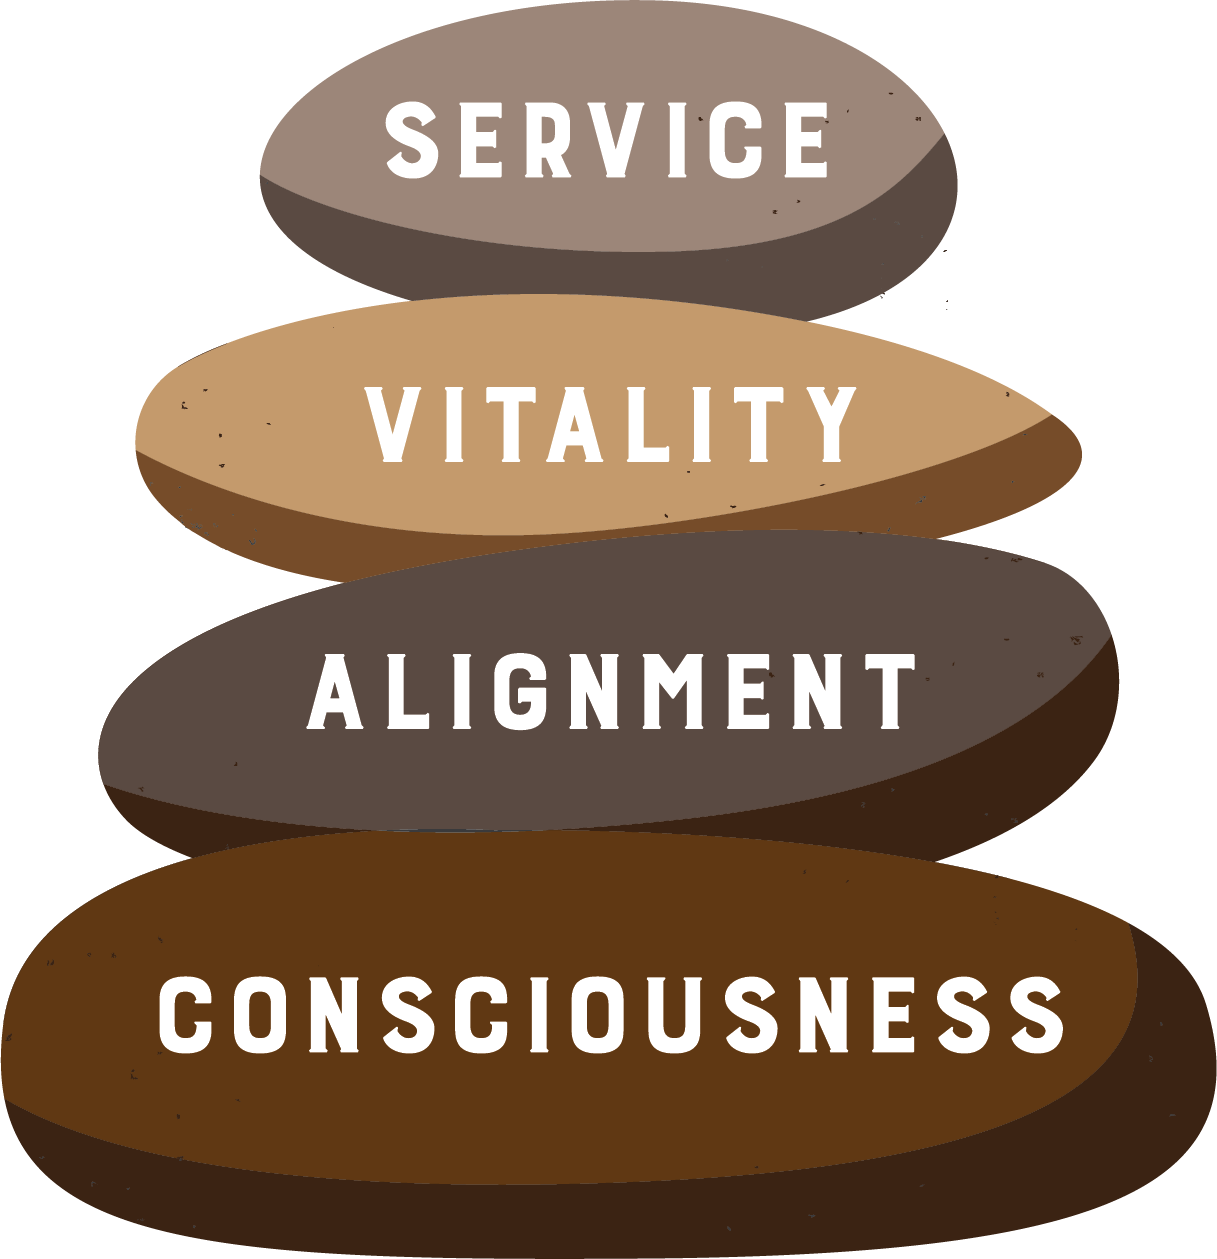 Graphic drawing of foundation in the form of carved stones, like a cairn or monument. Foundation: Consciousness. On top of that: Alignment. On top of that: Vitality. On top of that: Service.